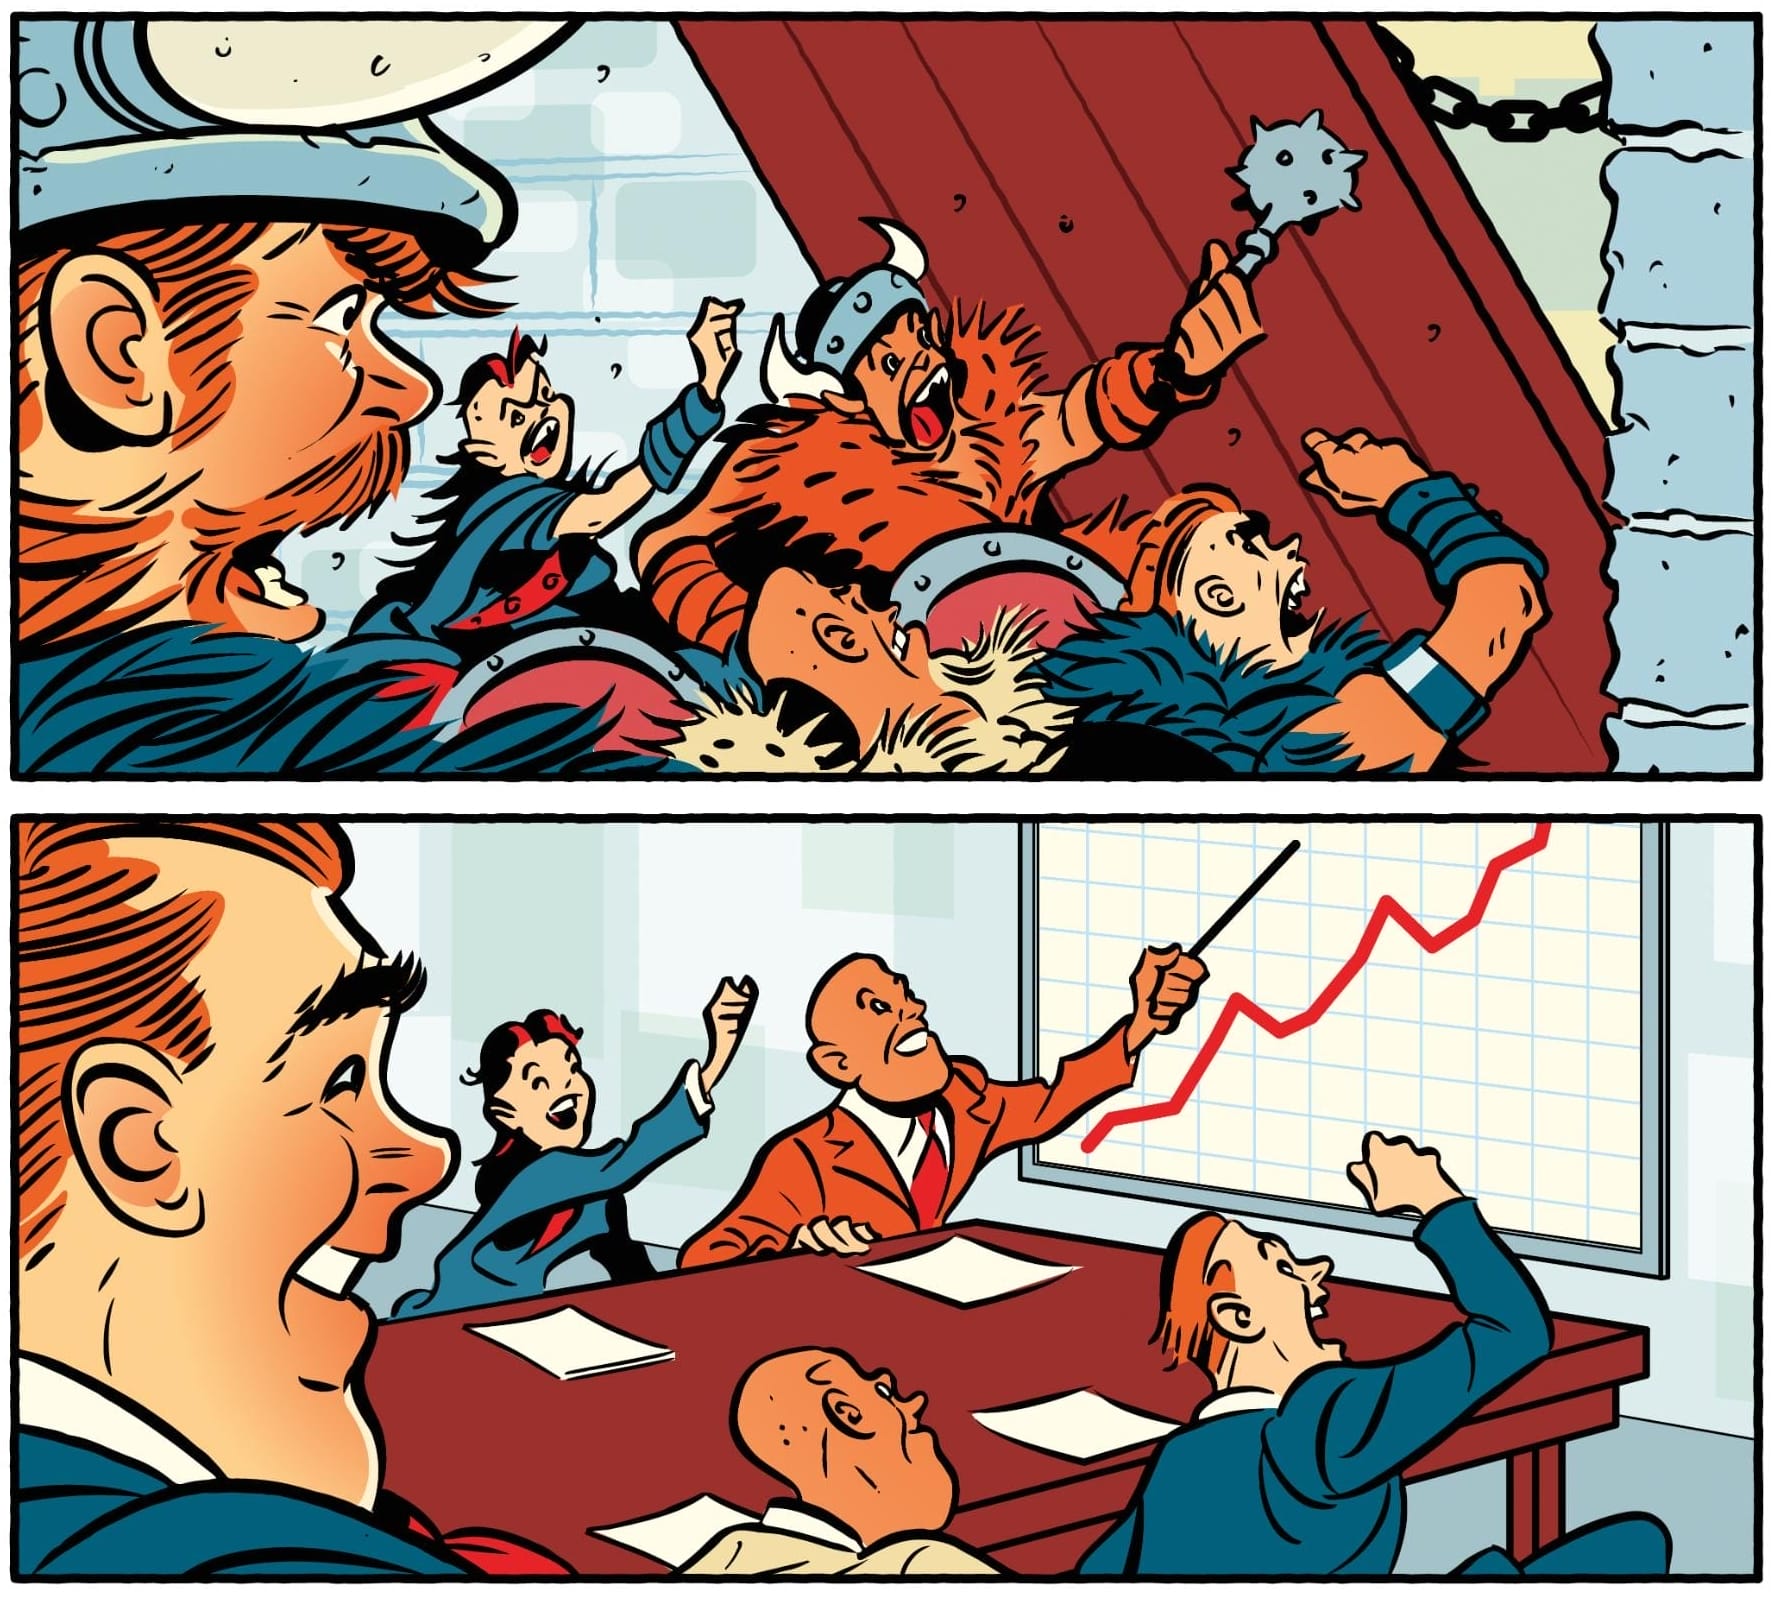 Conceptual illustration of private equity investors as barbarians at the gate versus a depiction of tamer investors cheering in front of a chart showing a successful investment's performance.